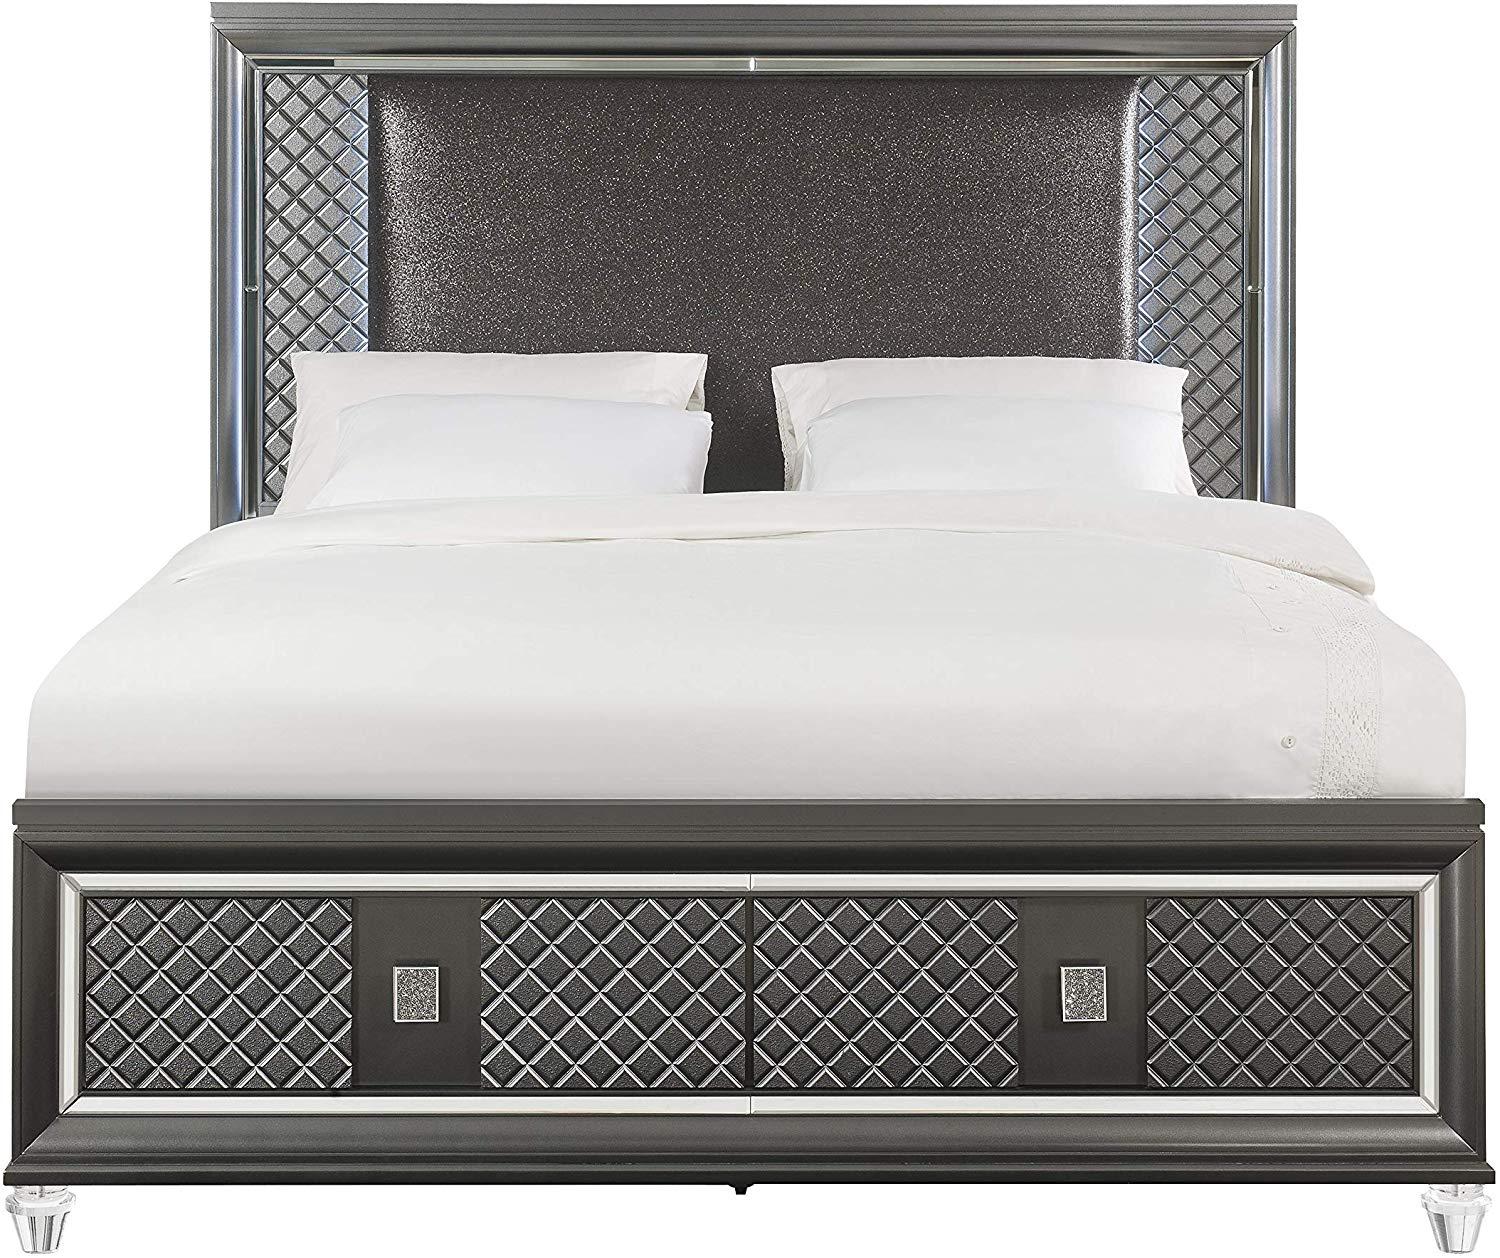 

    
Transitional Metallic Gray Finish Storage Queen Bed Sawyer-27970Q  Acme
